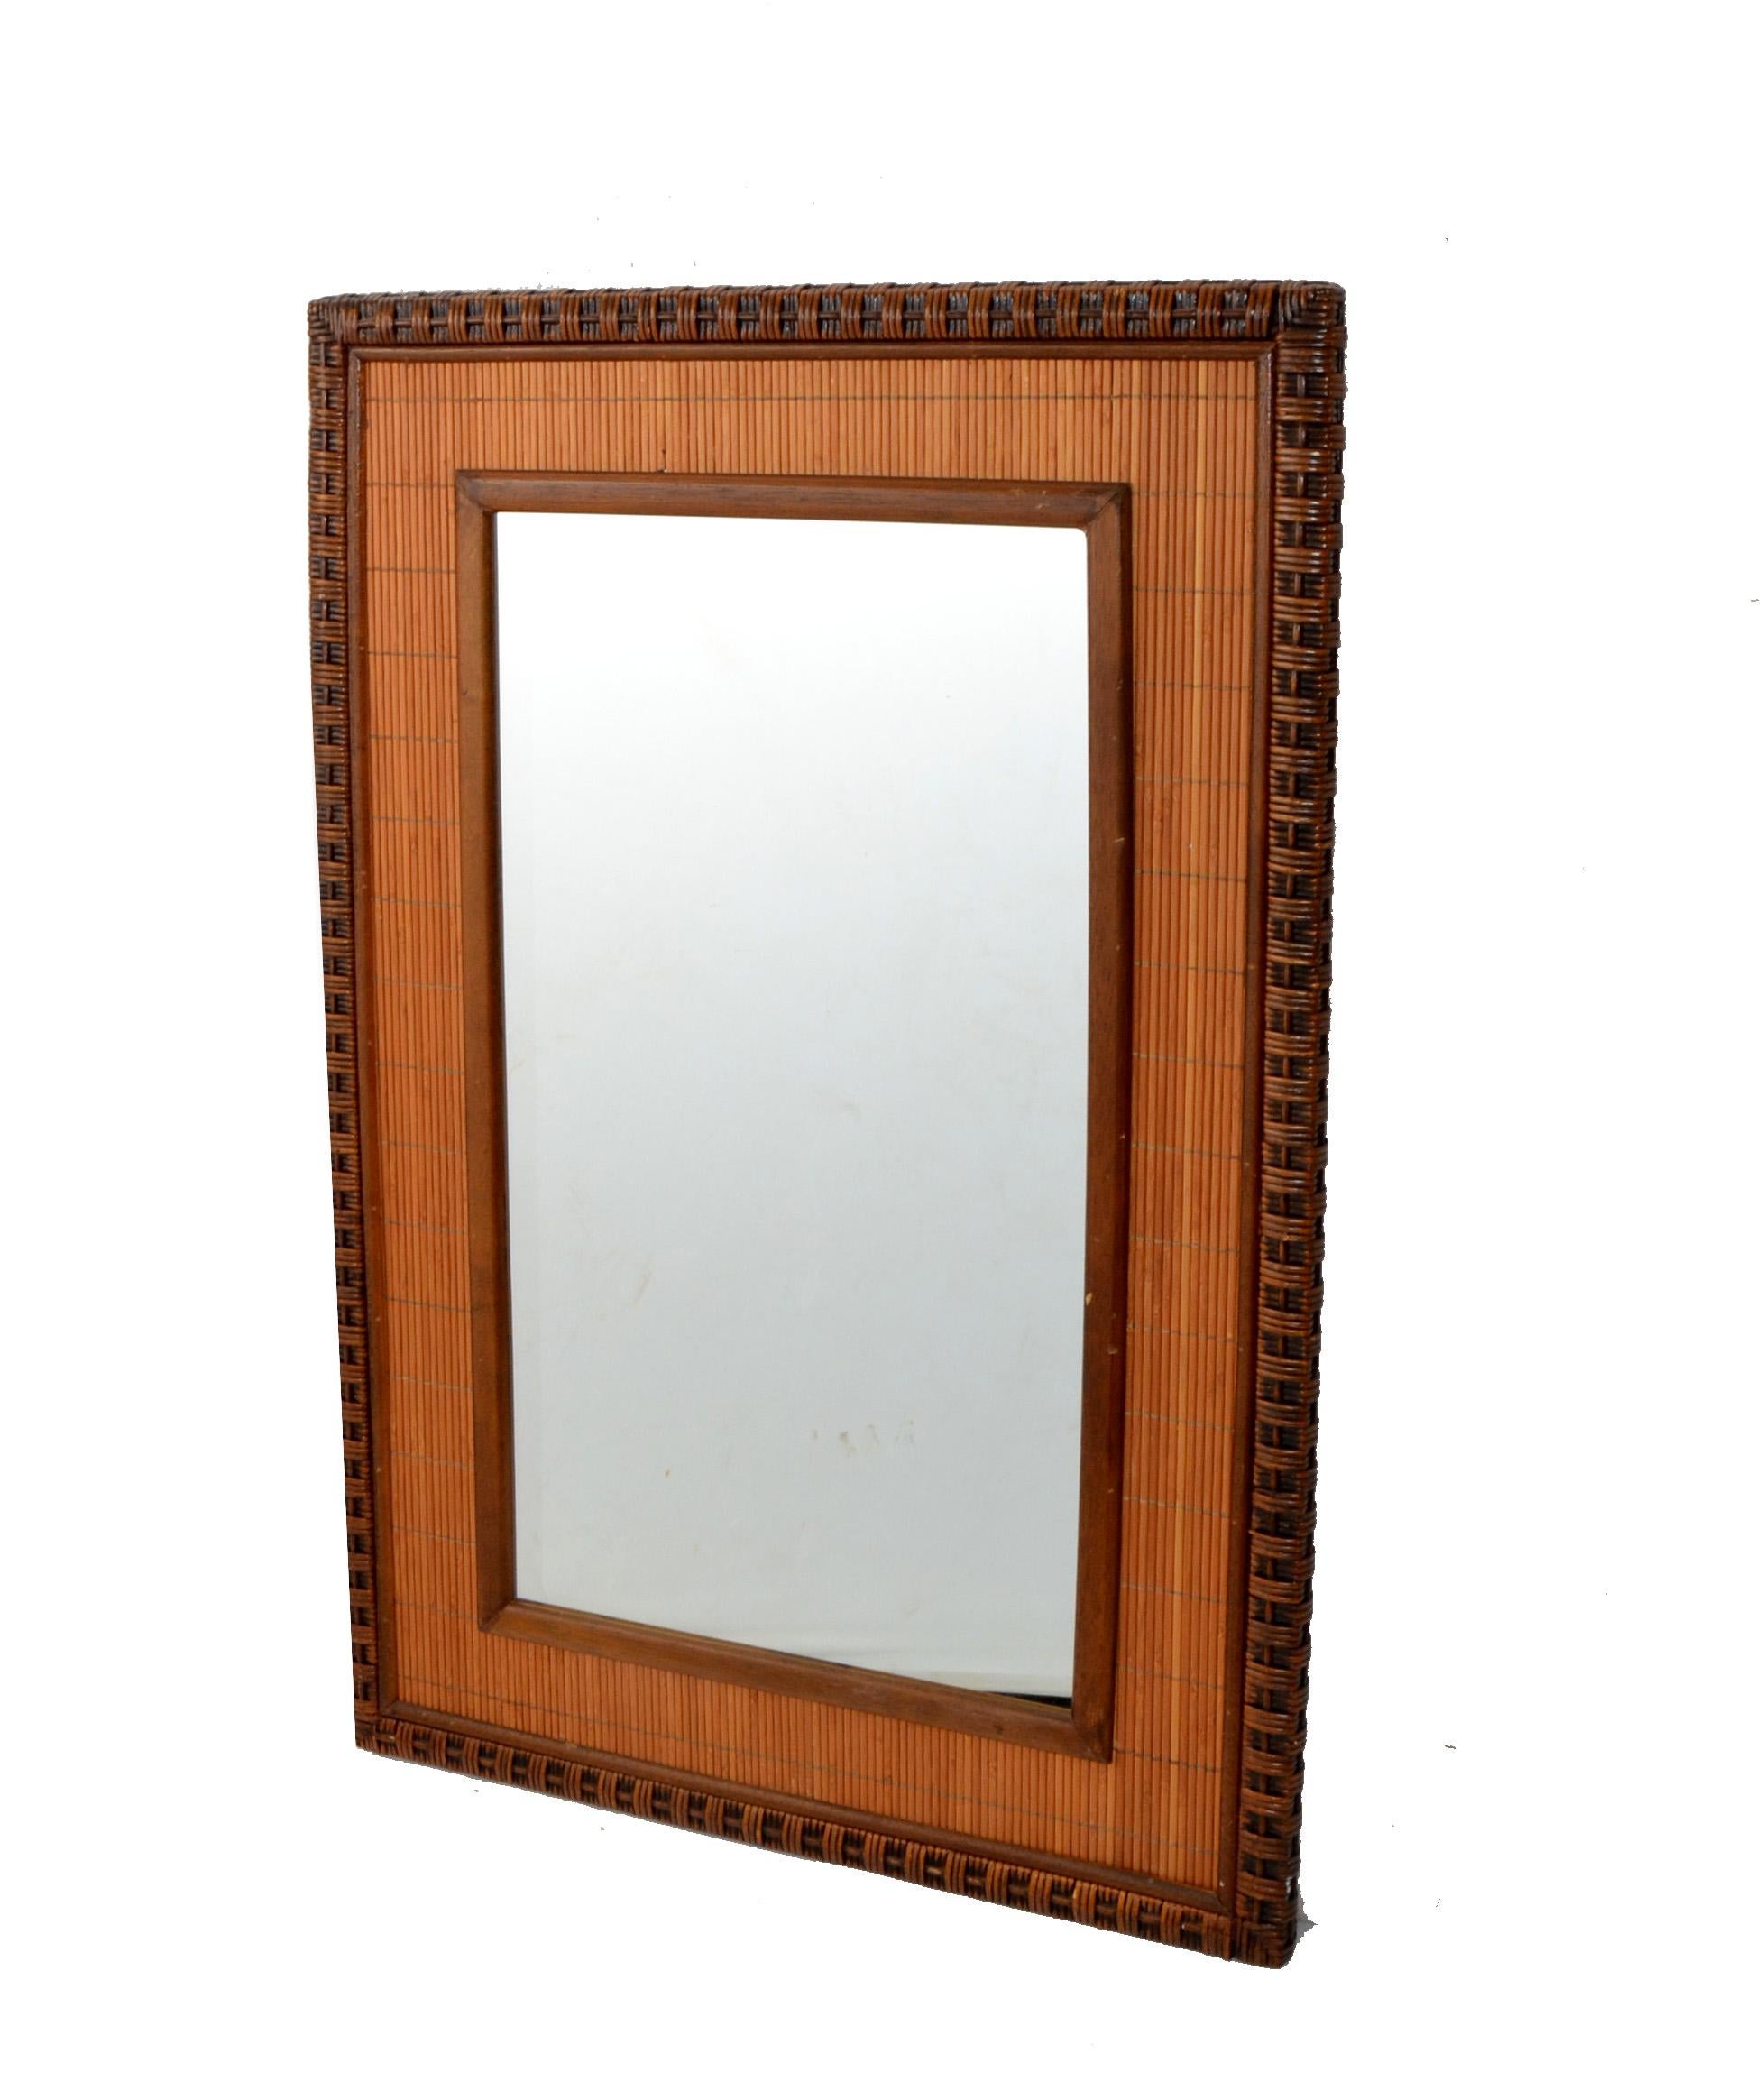 Rectangle Mid-Century Modern Handwoven Rattan Wicker Wall Mirror Boho Chic 1979 In Good Condition For Sale In Miami, FL